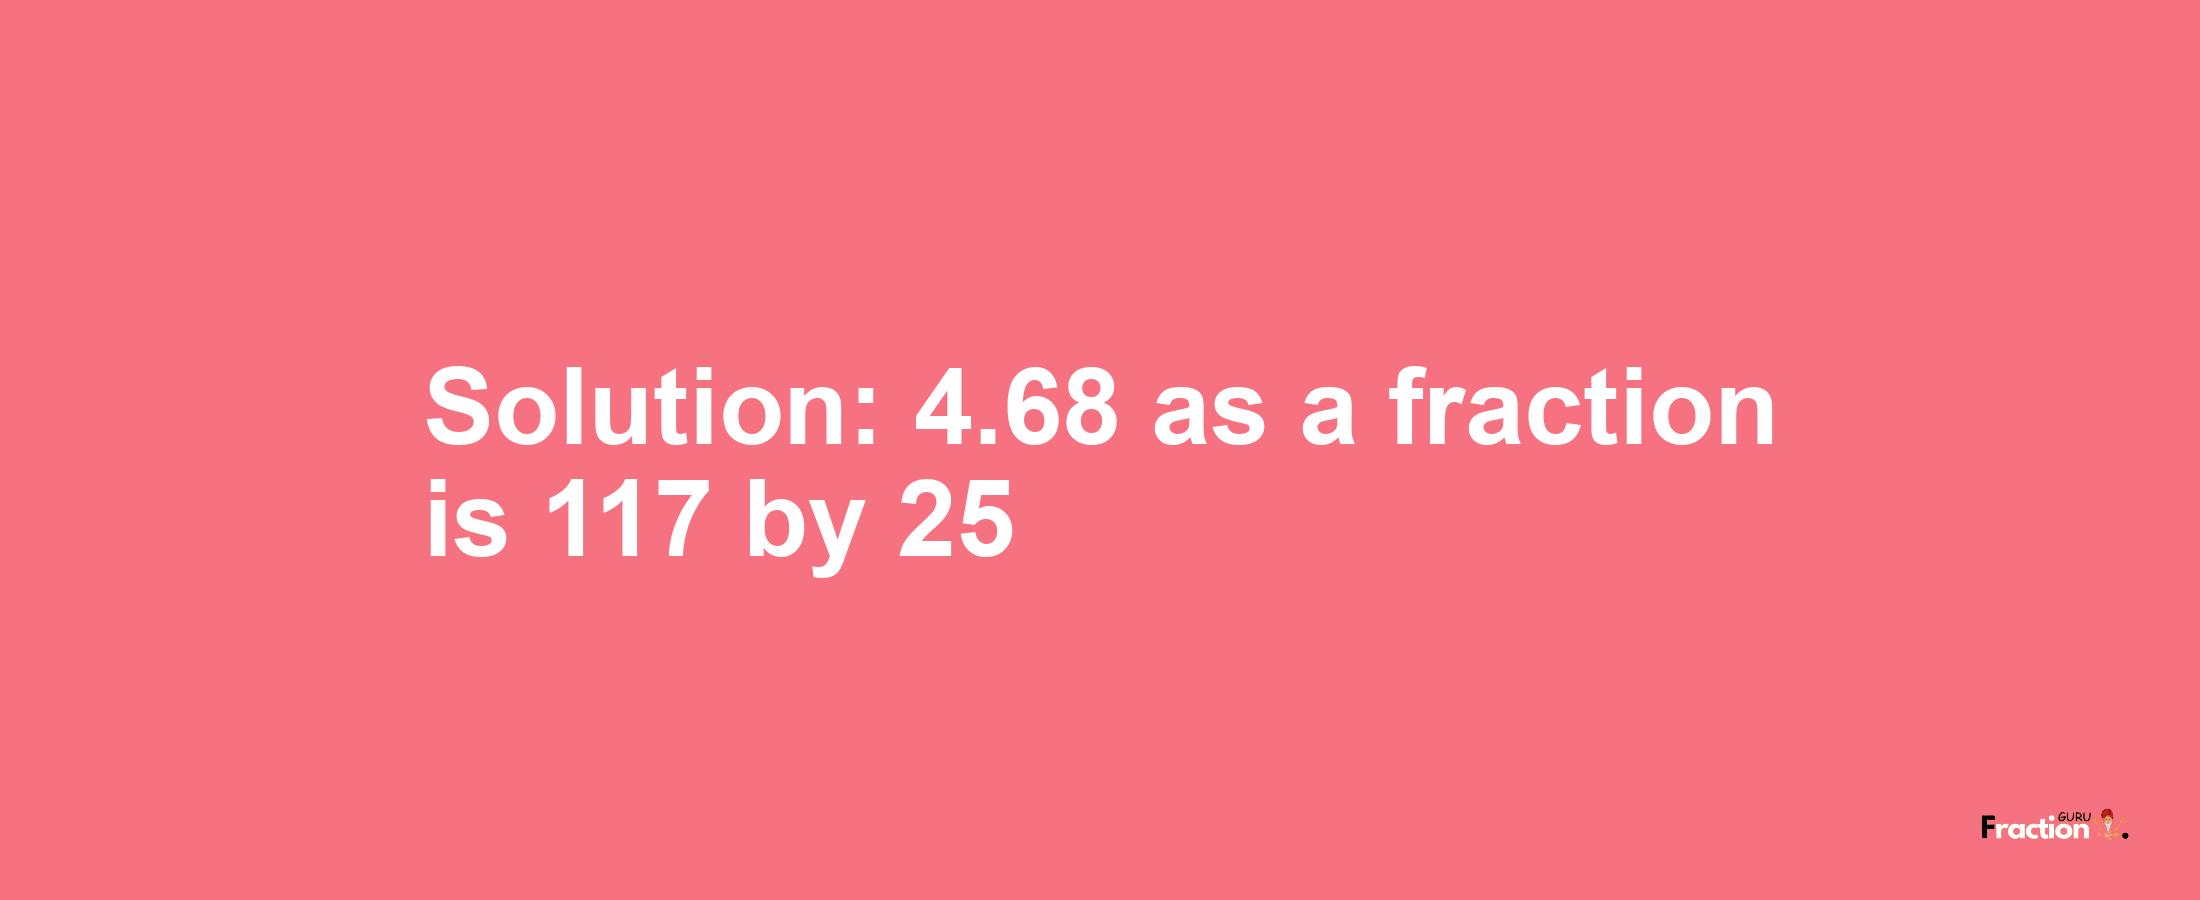 Solution:4.68 as a fraction is 117/25